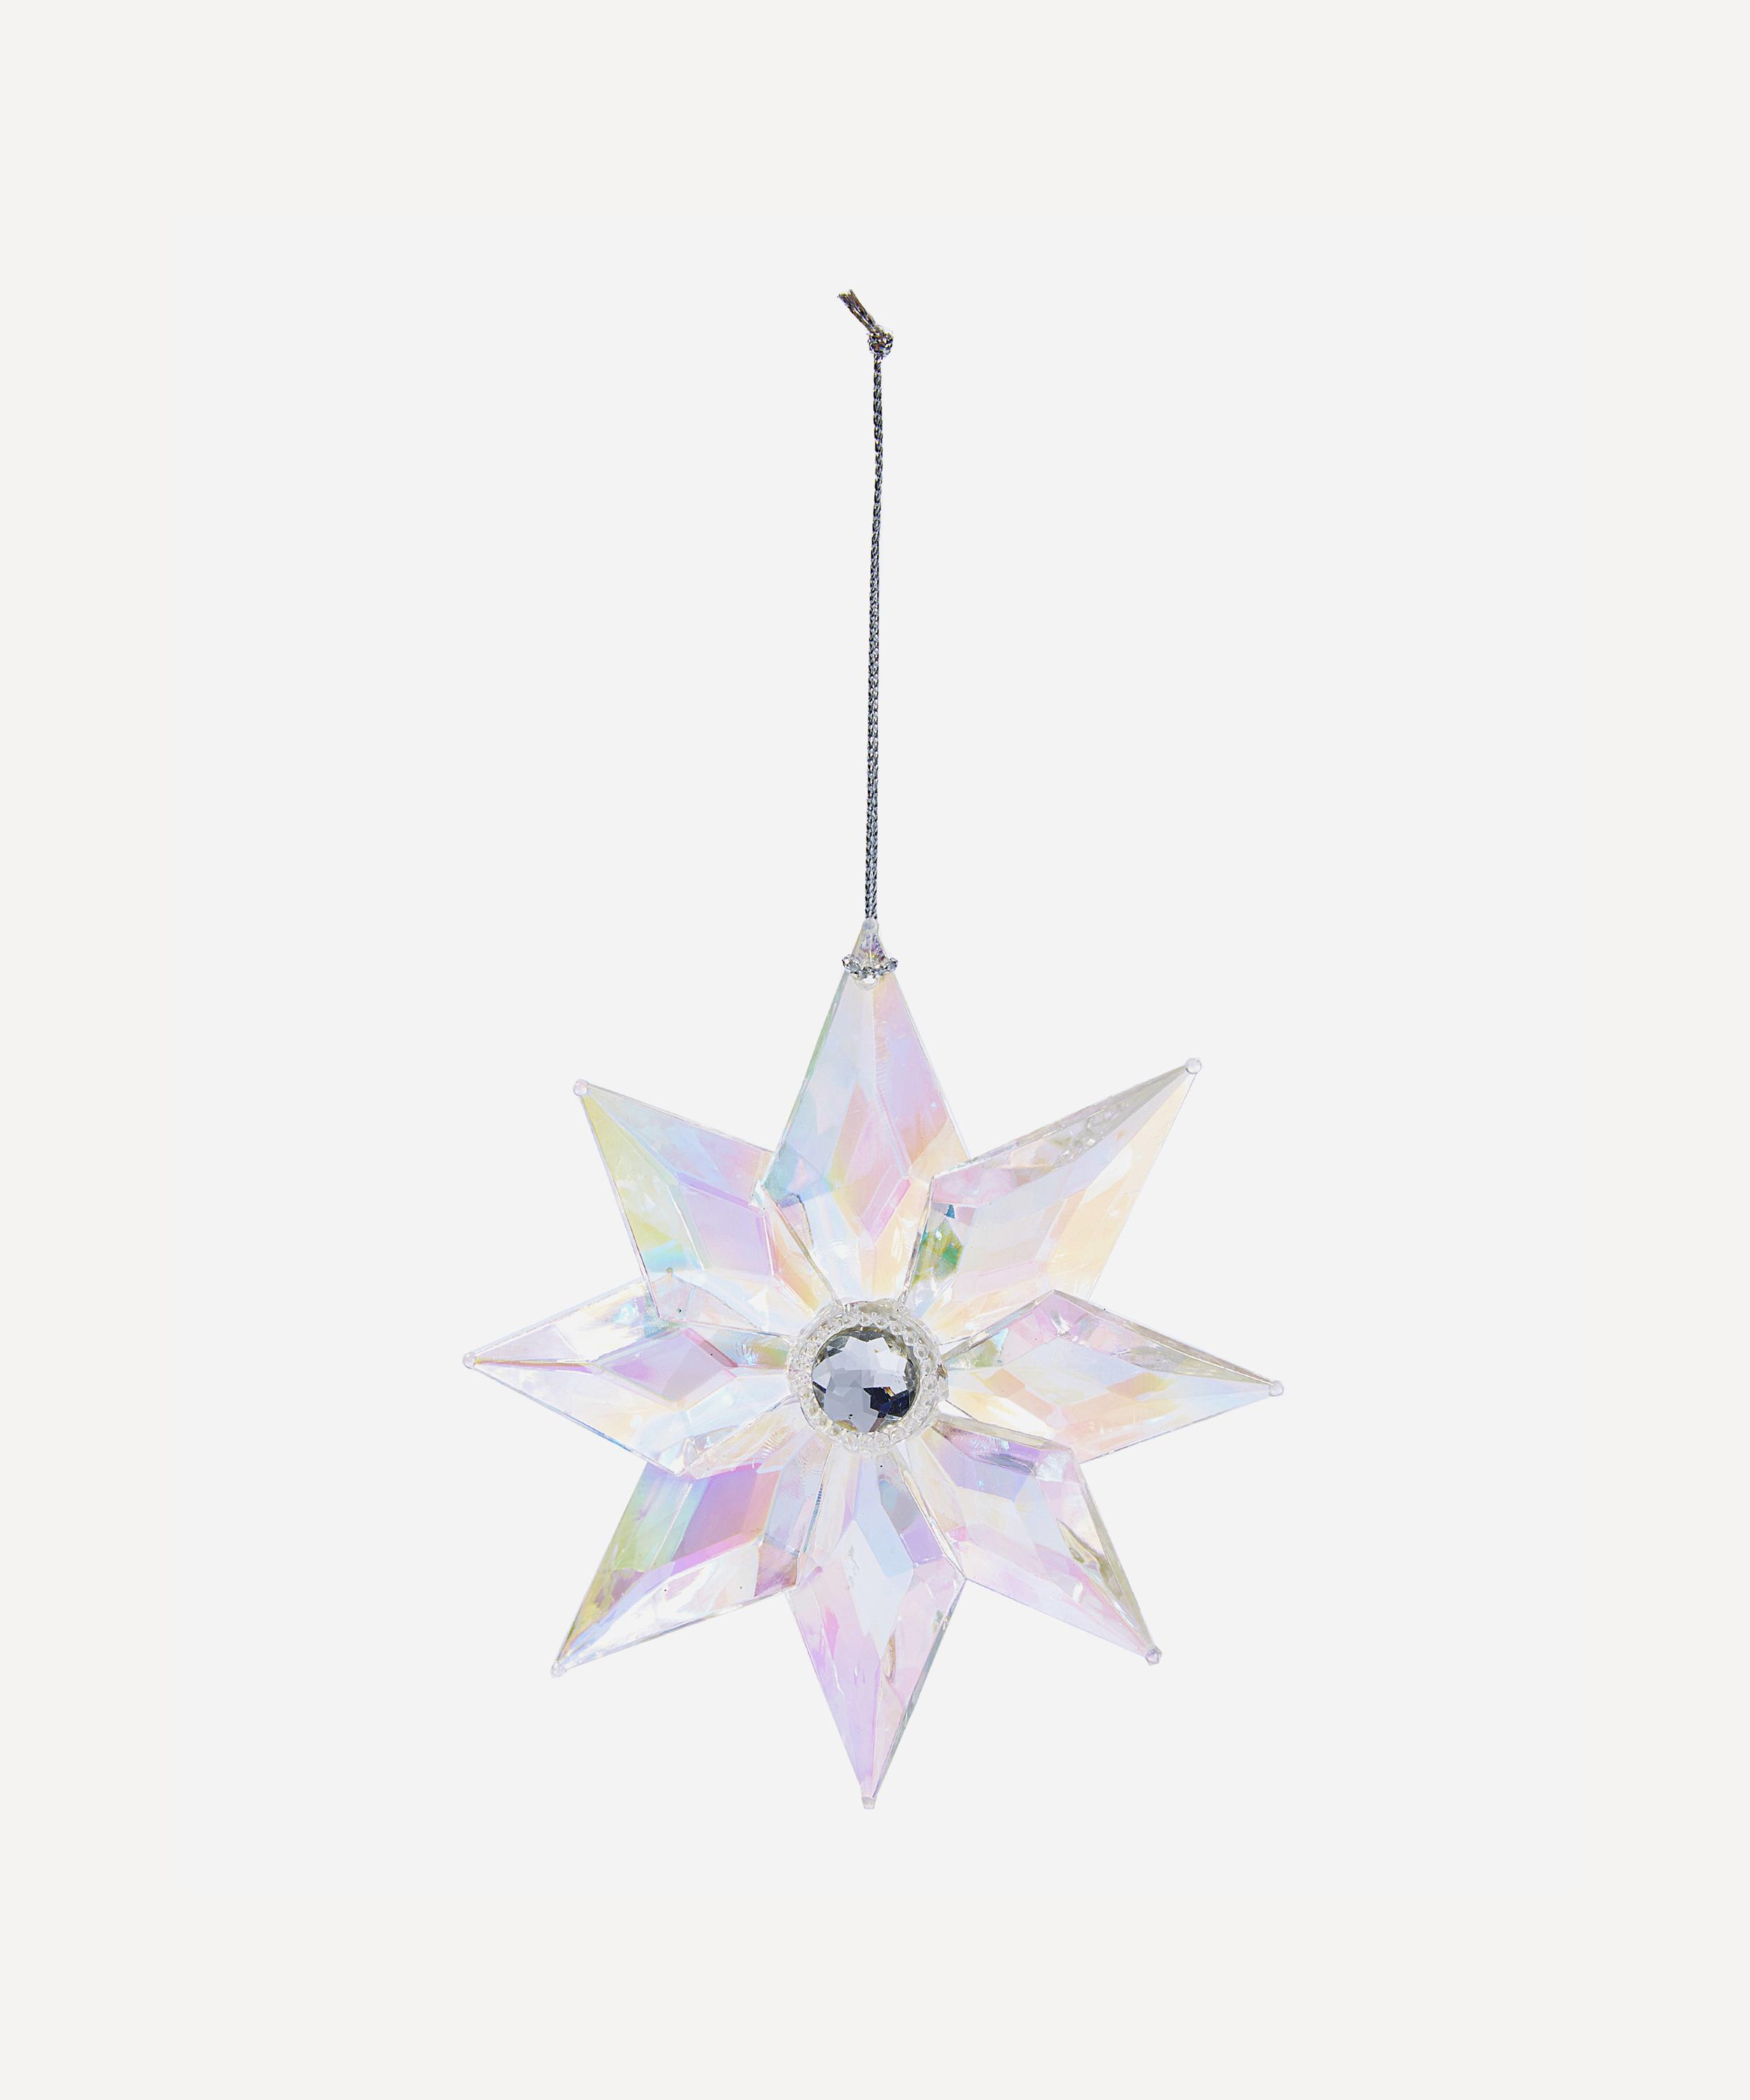 Unspecified Shimmering Acrylic Flower Jewel Decoration | Liberty